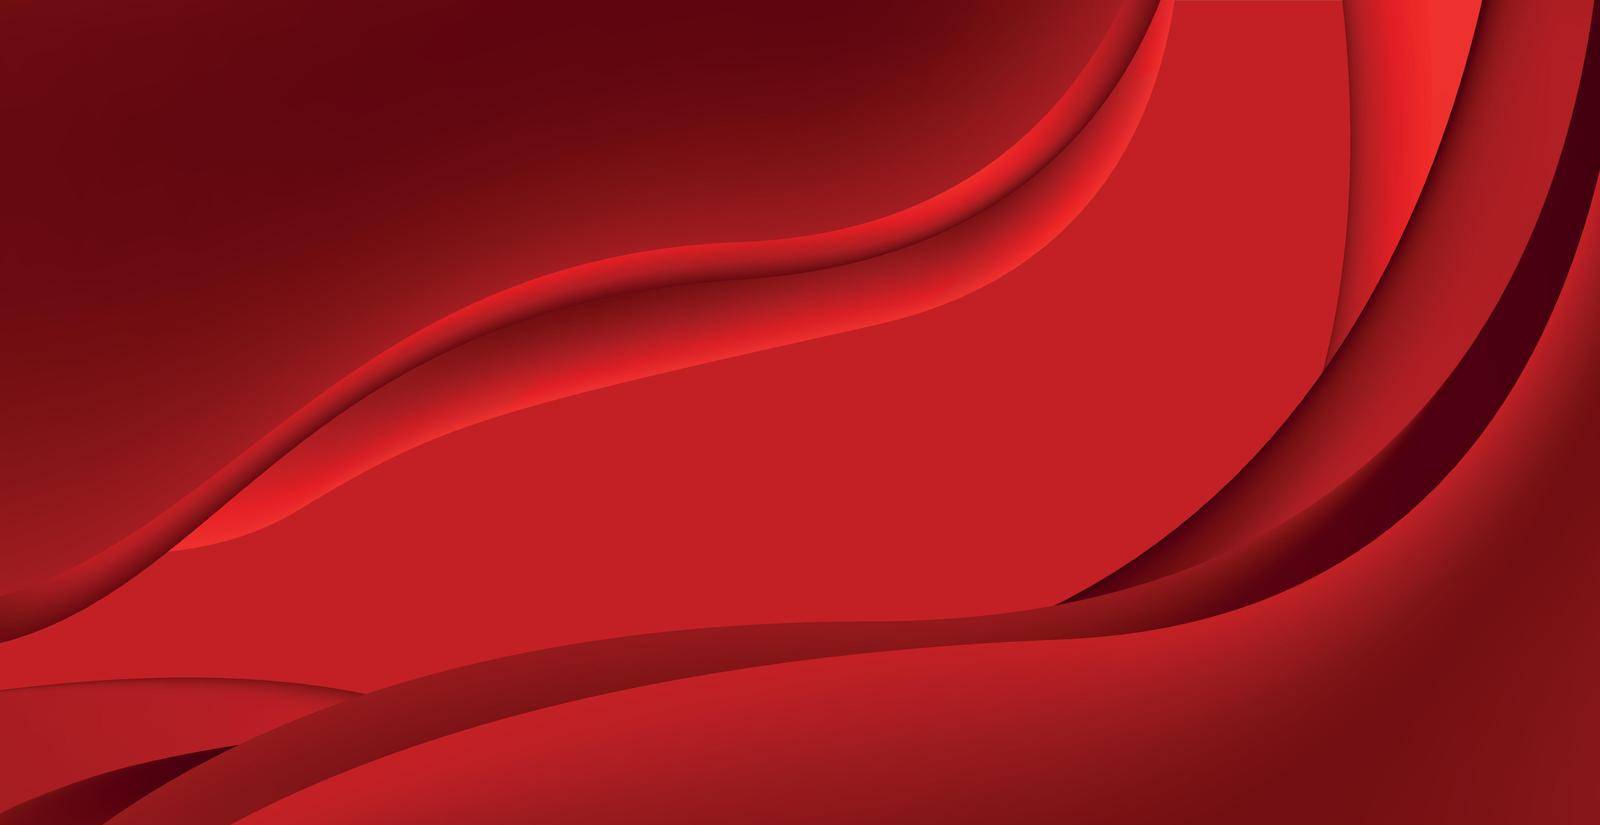 Volumetric lines on a red background - panoramic Vector background by BEMPhoto